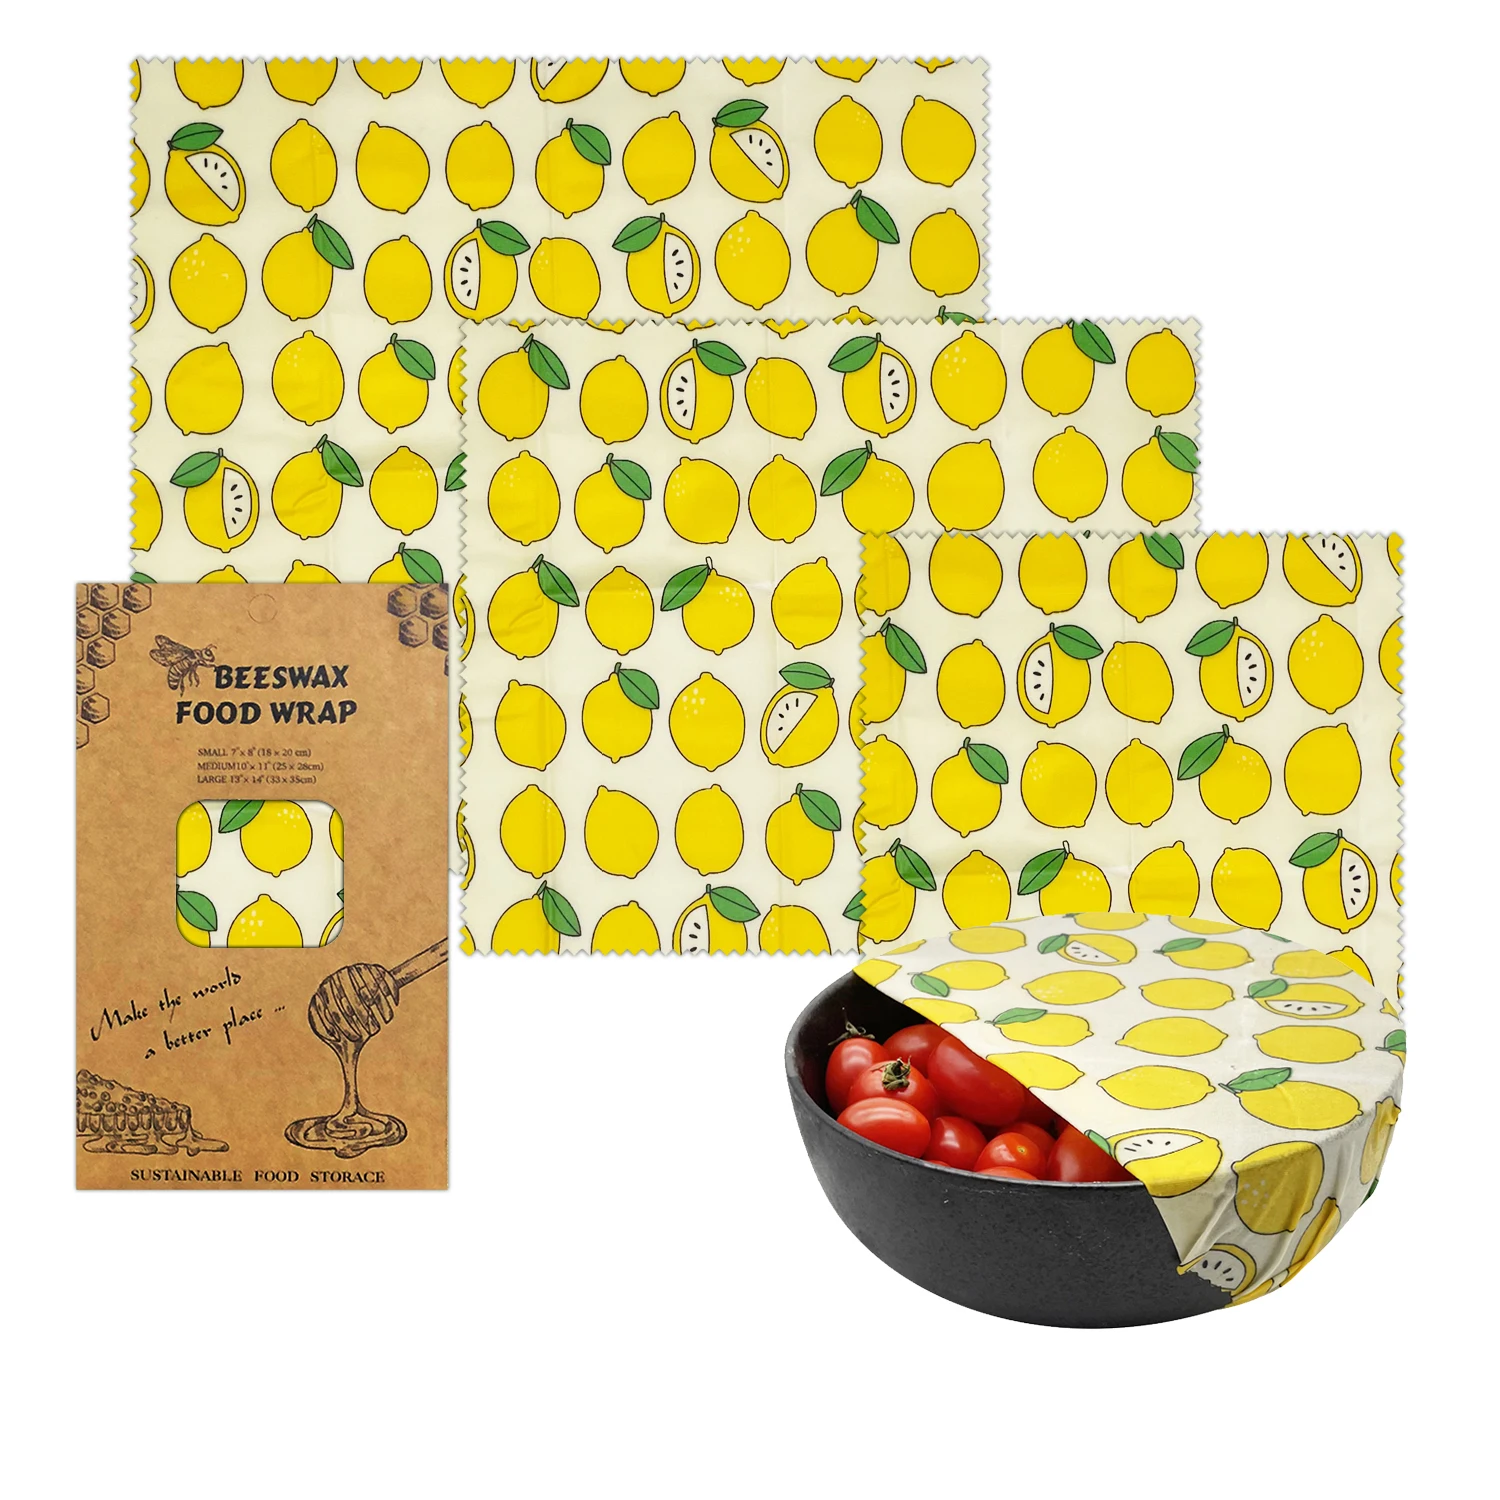 

Eco Friendly Reusable Food Wraps Biodegradable Sustainable Plastic Free Food Beeswax Wraps